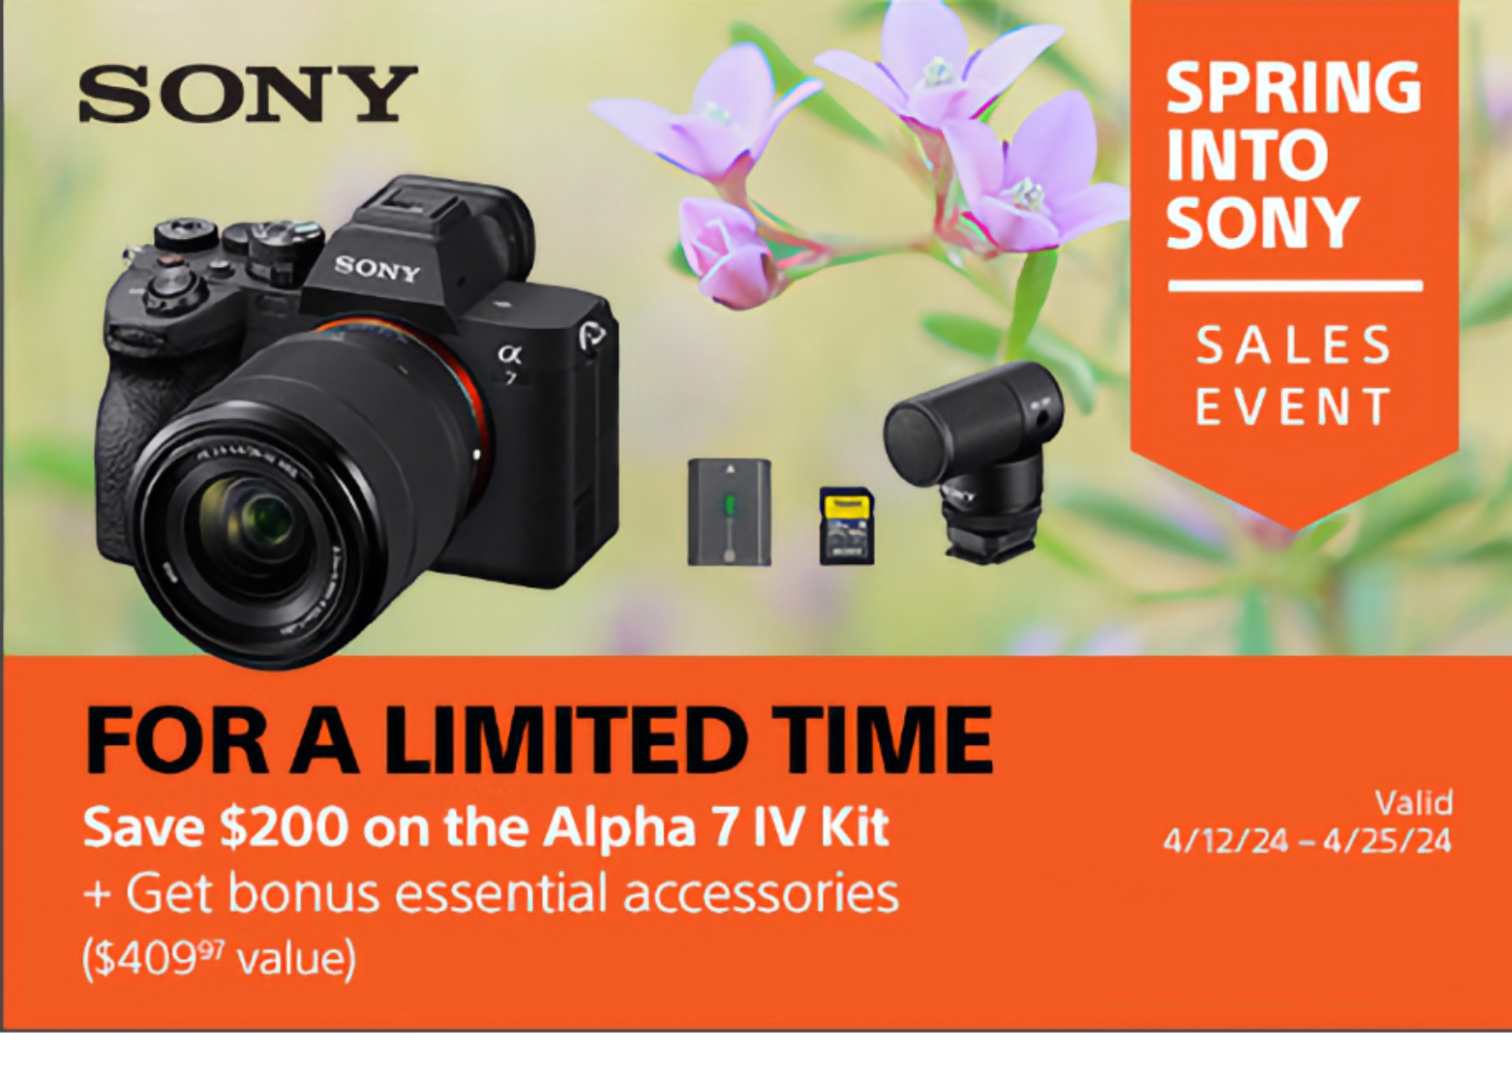 Great promotion on the Sony A7 IV